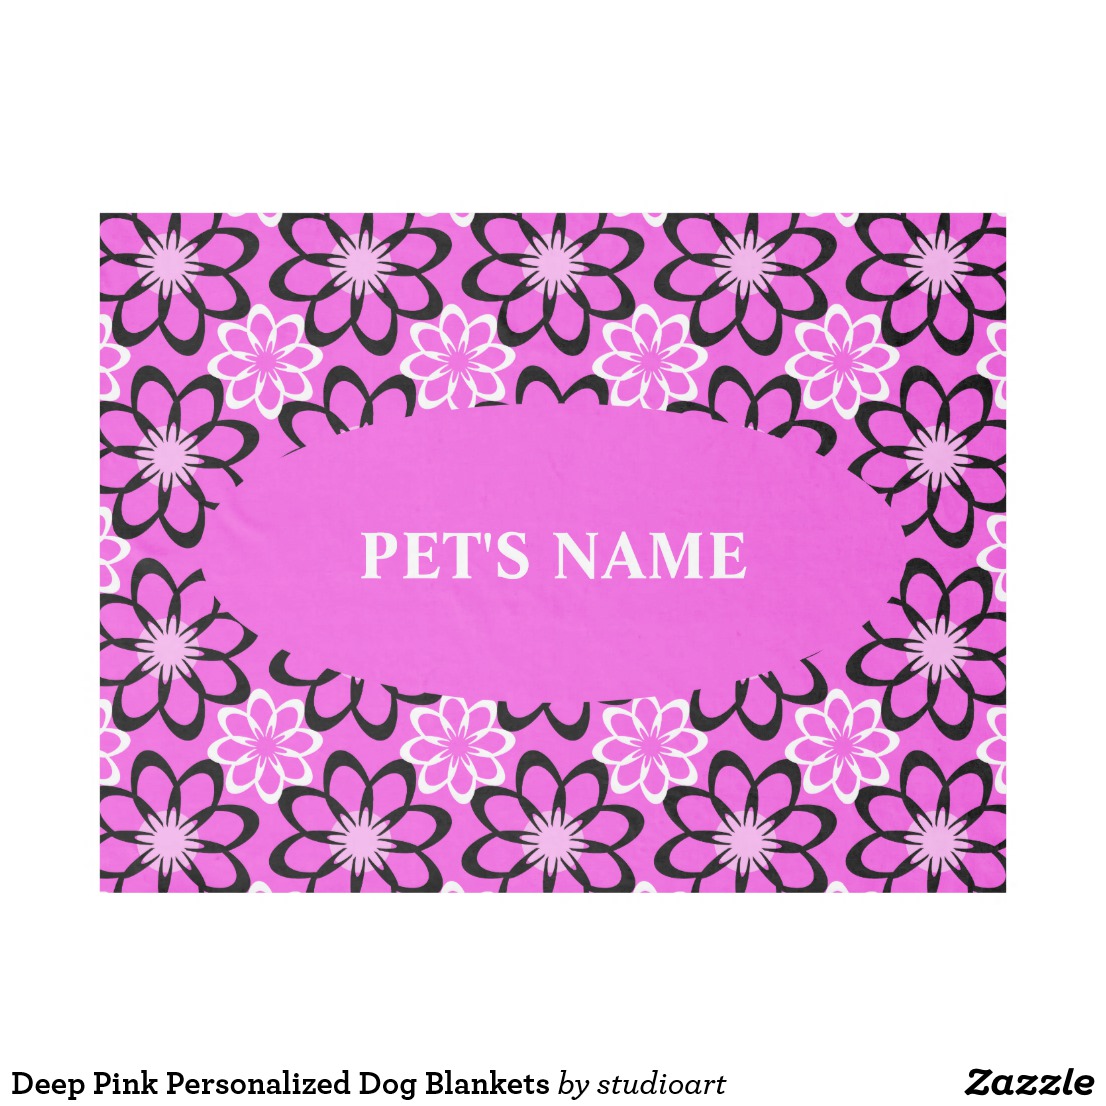 Personalized deep pink dog blankets